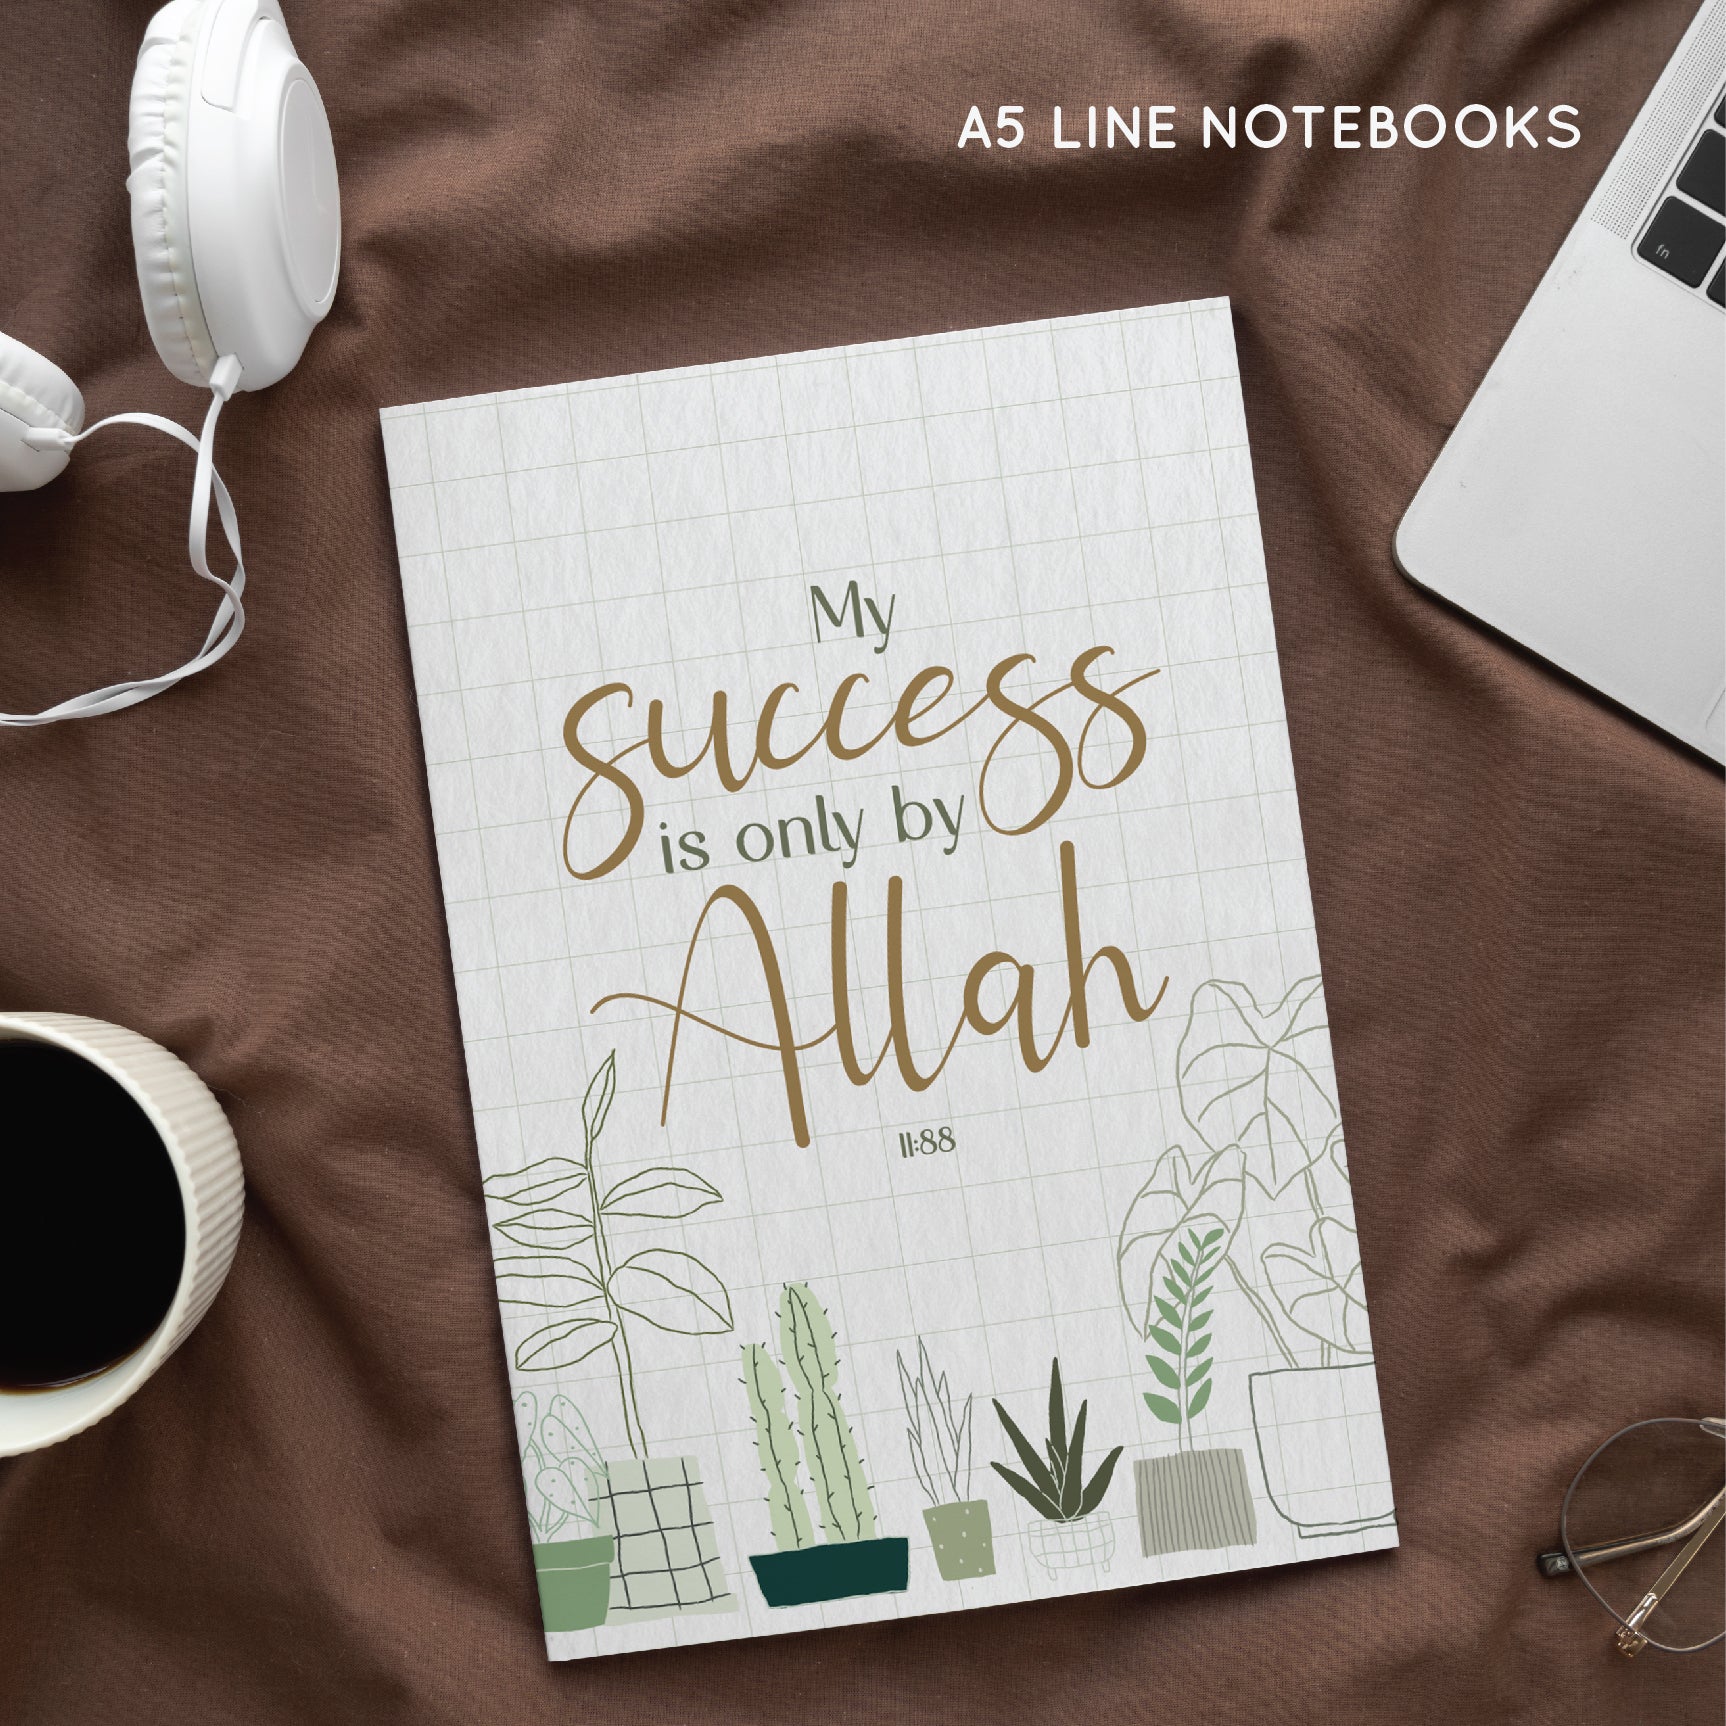 Islamic Notebook Knowledge Benefit